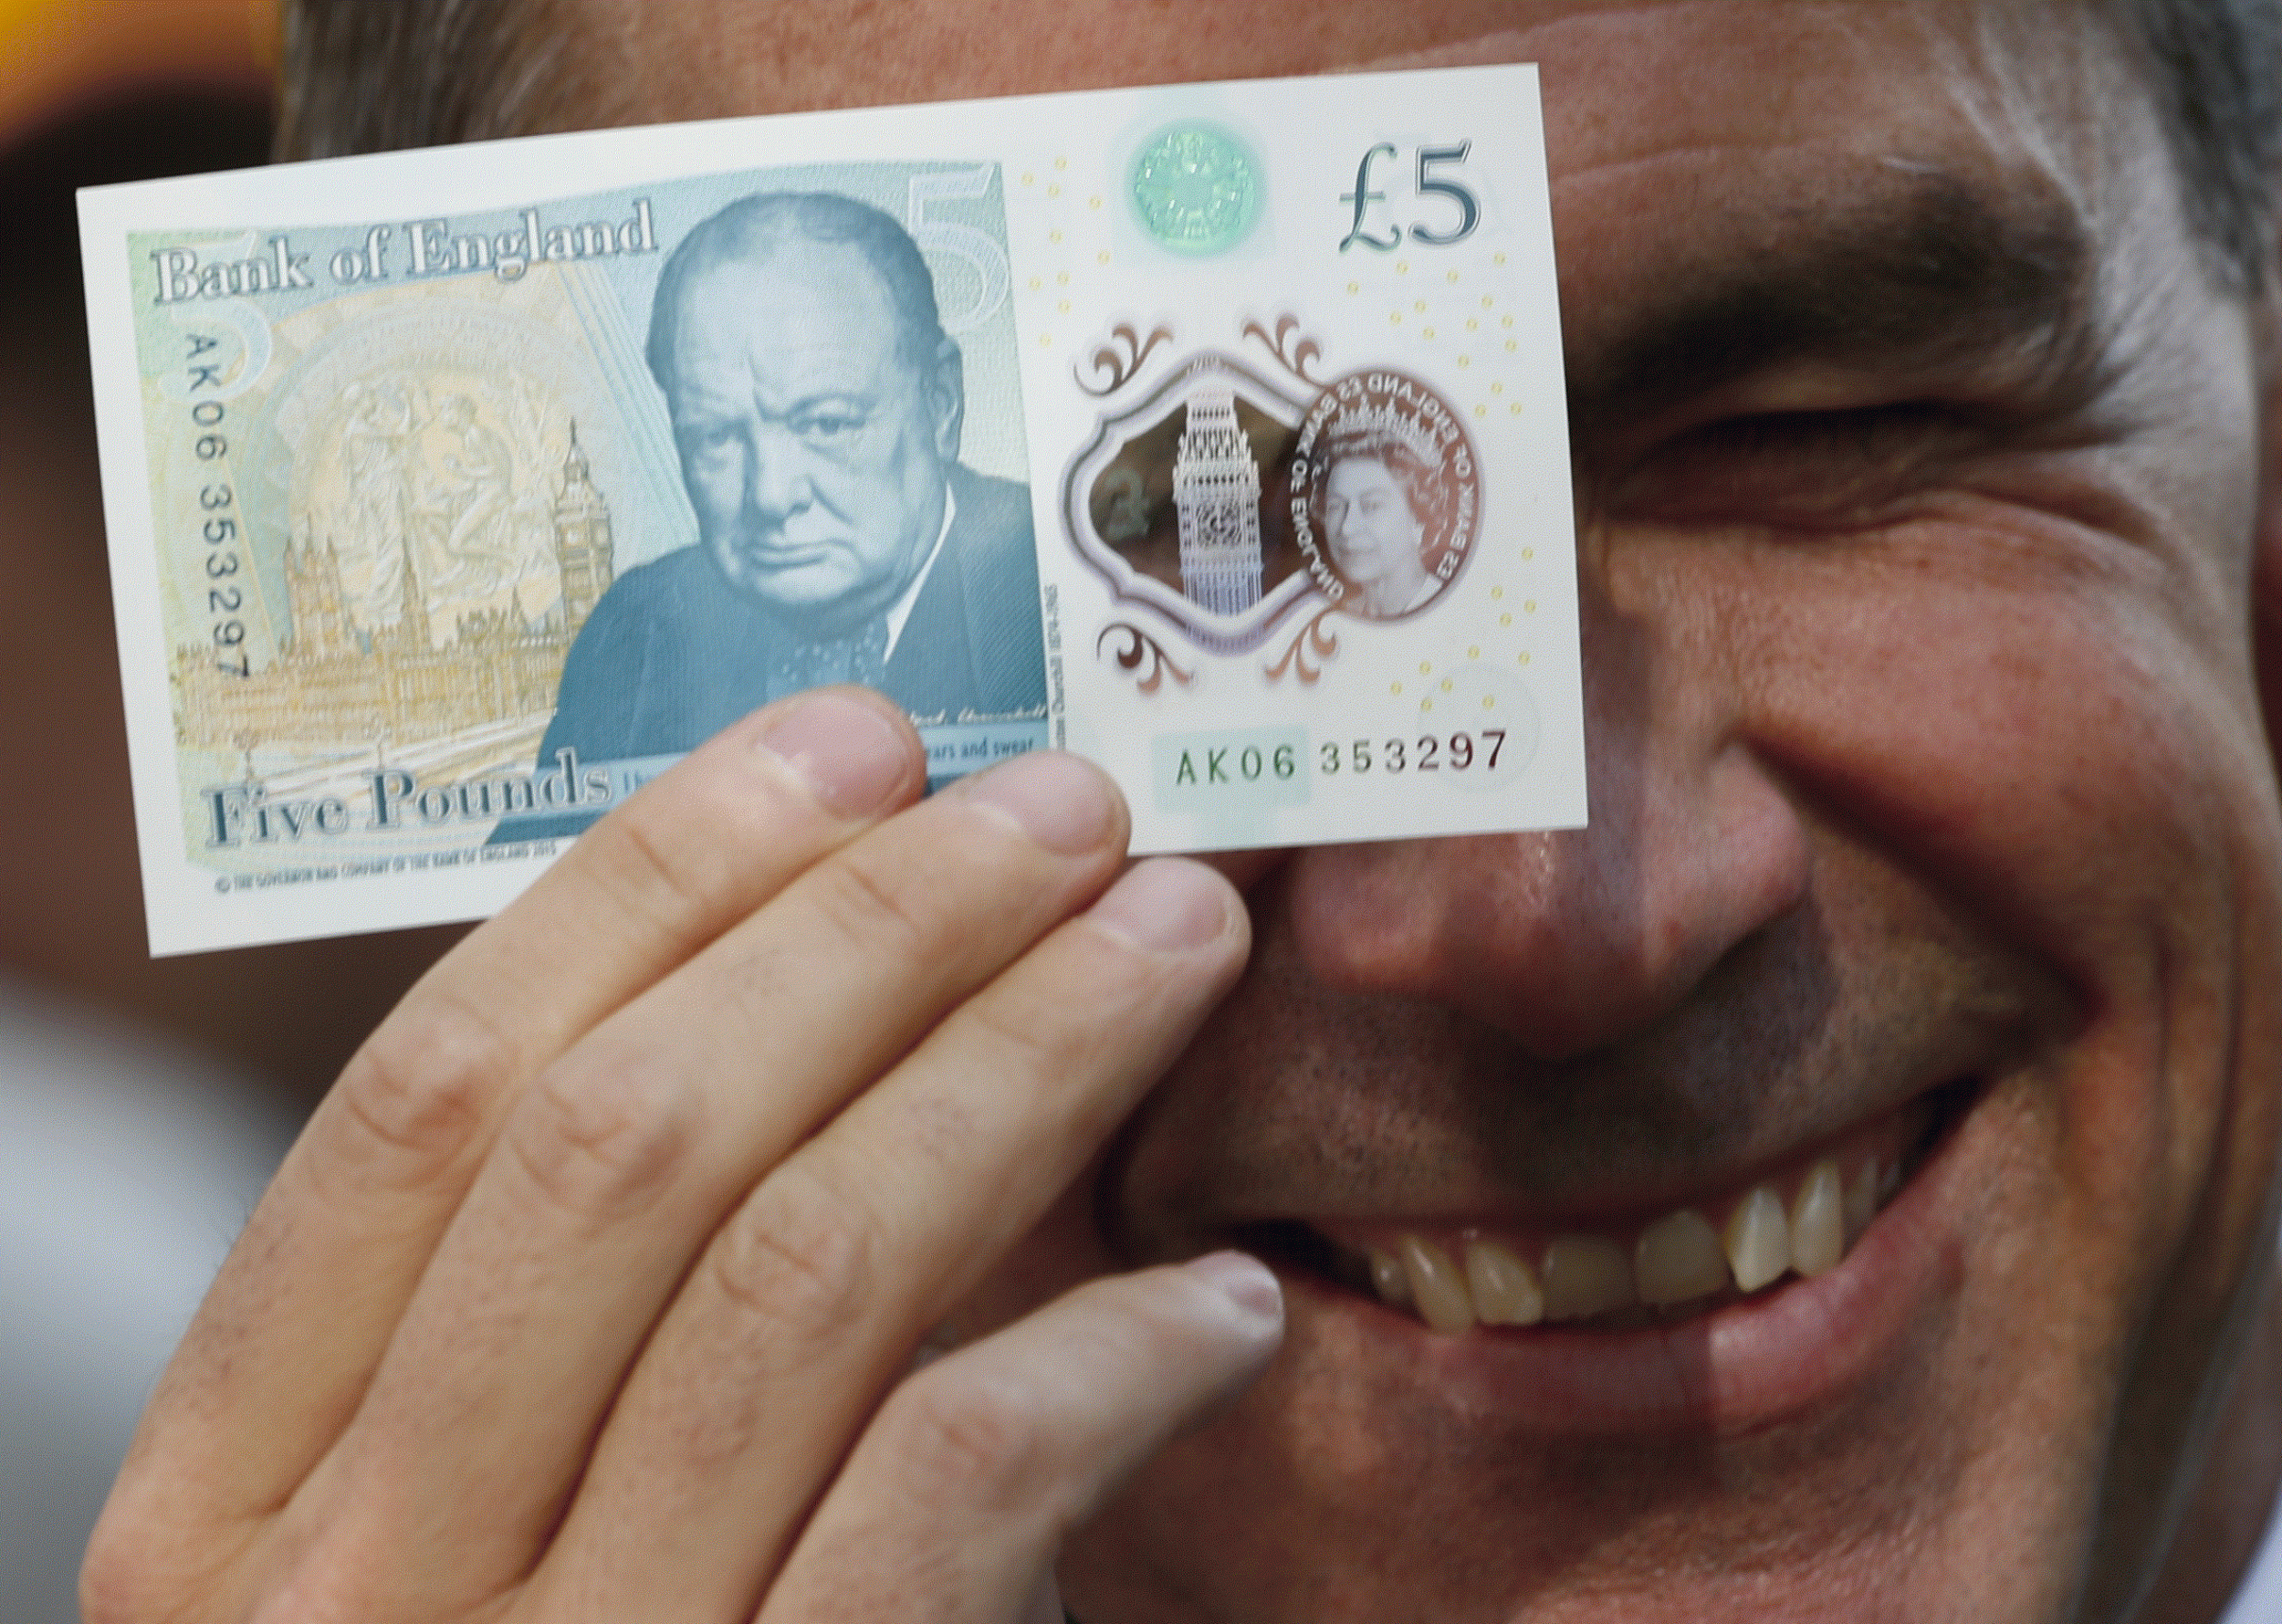 The Bank of England new £5 note has been nominated for the award